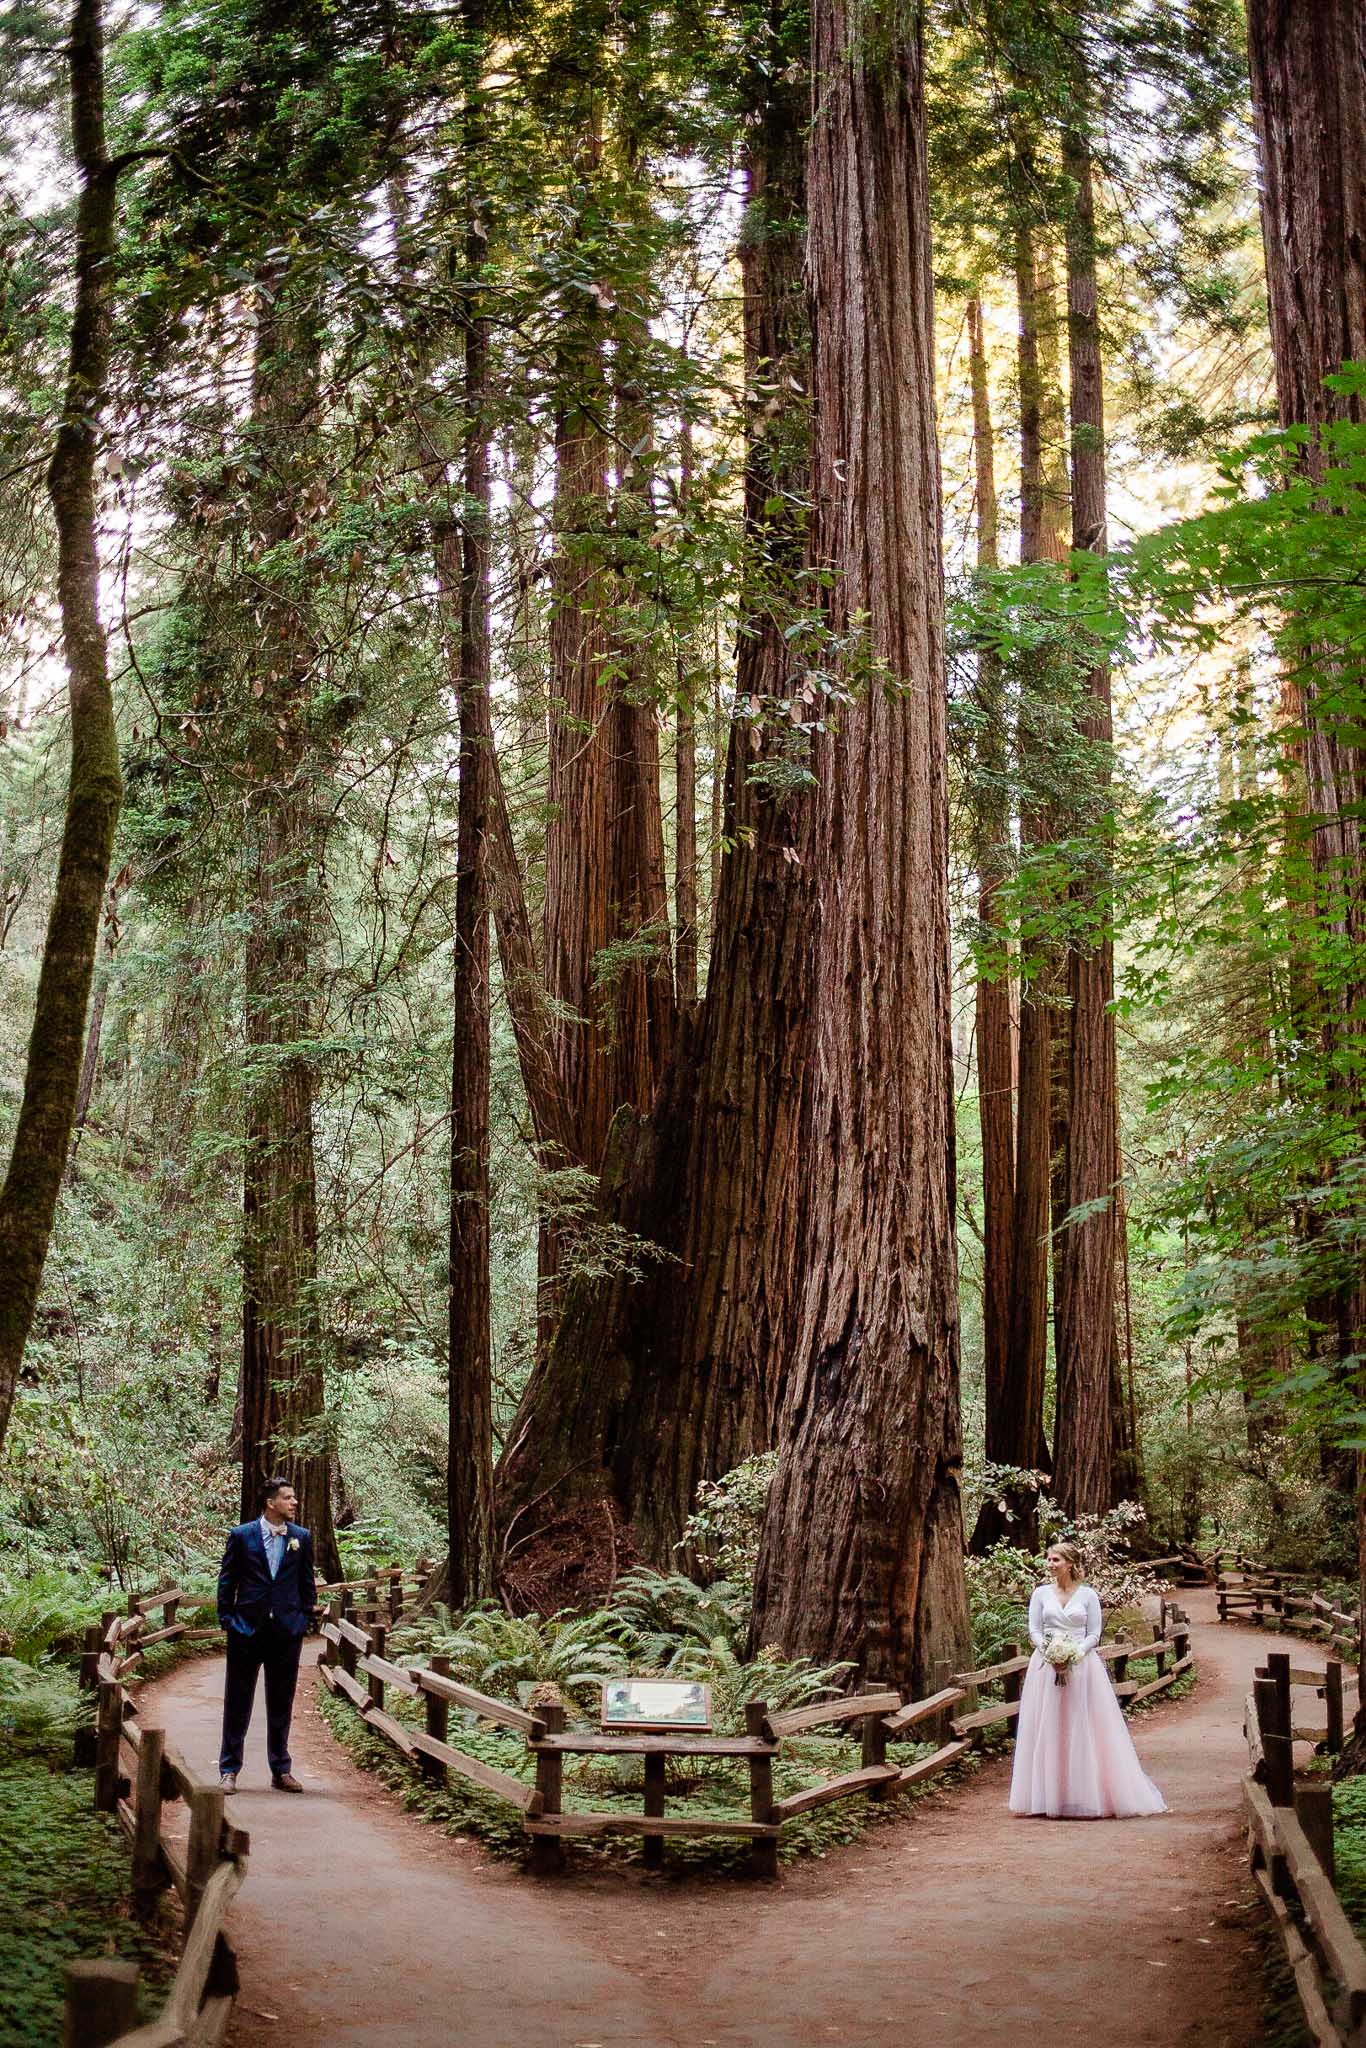 Bride and Groom pose for wedding photos in the Muir Woods National Monument